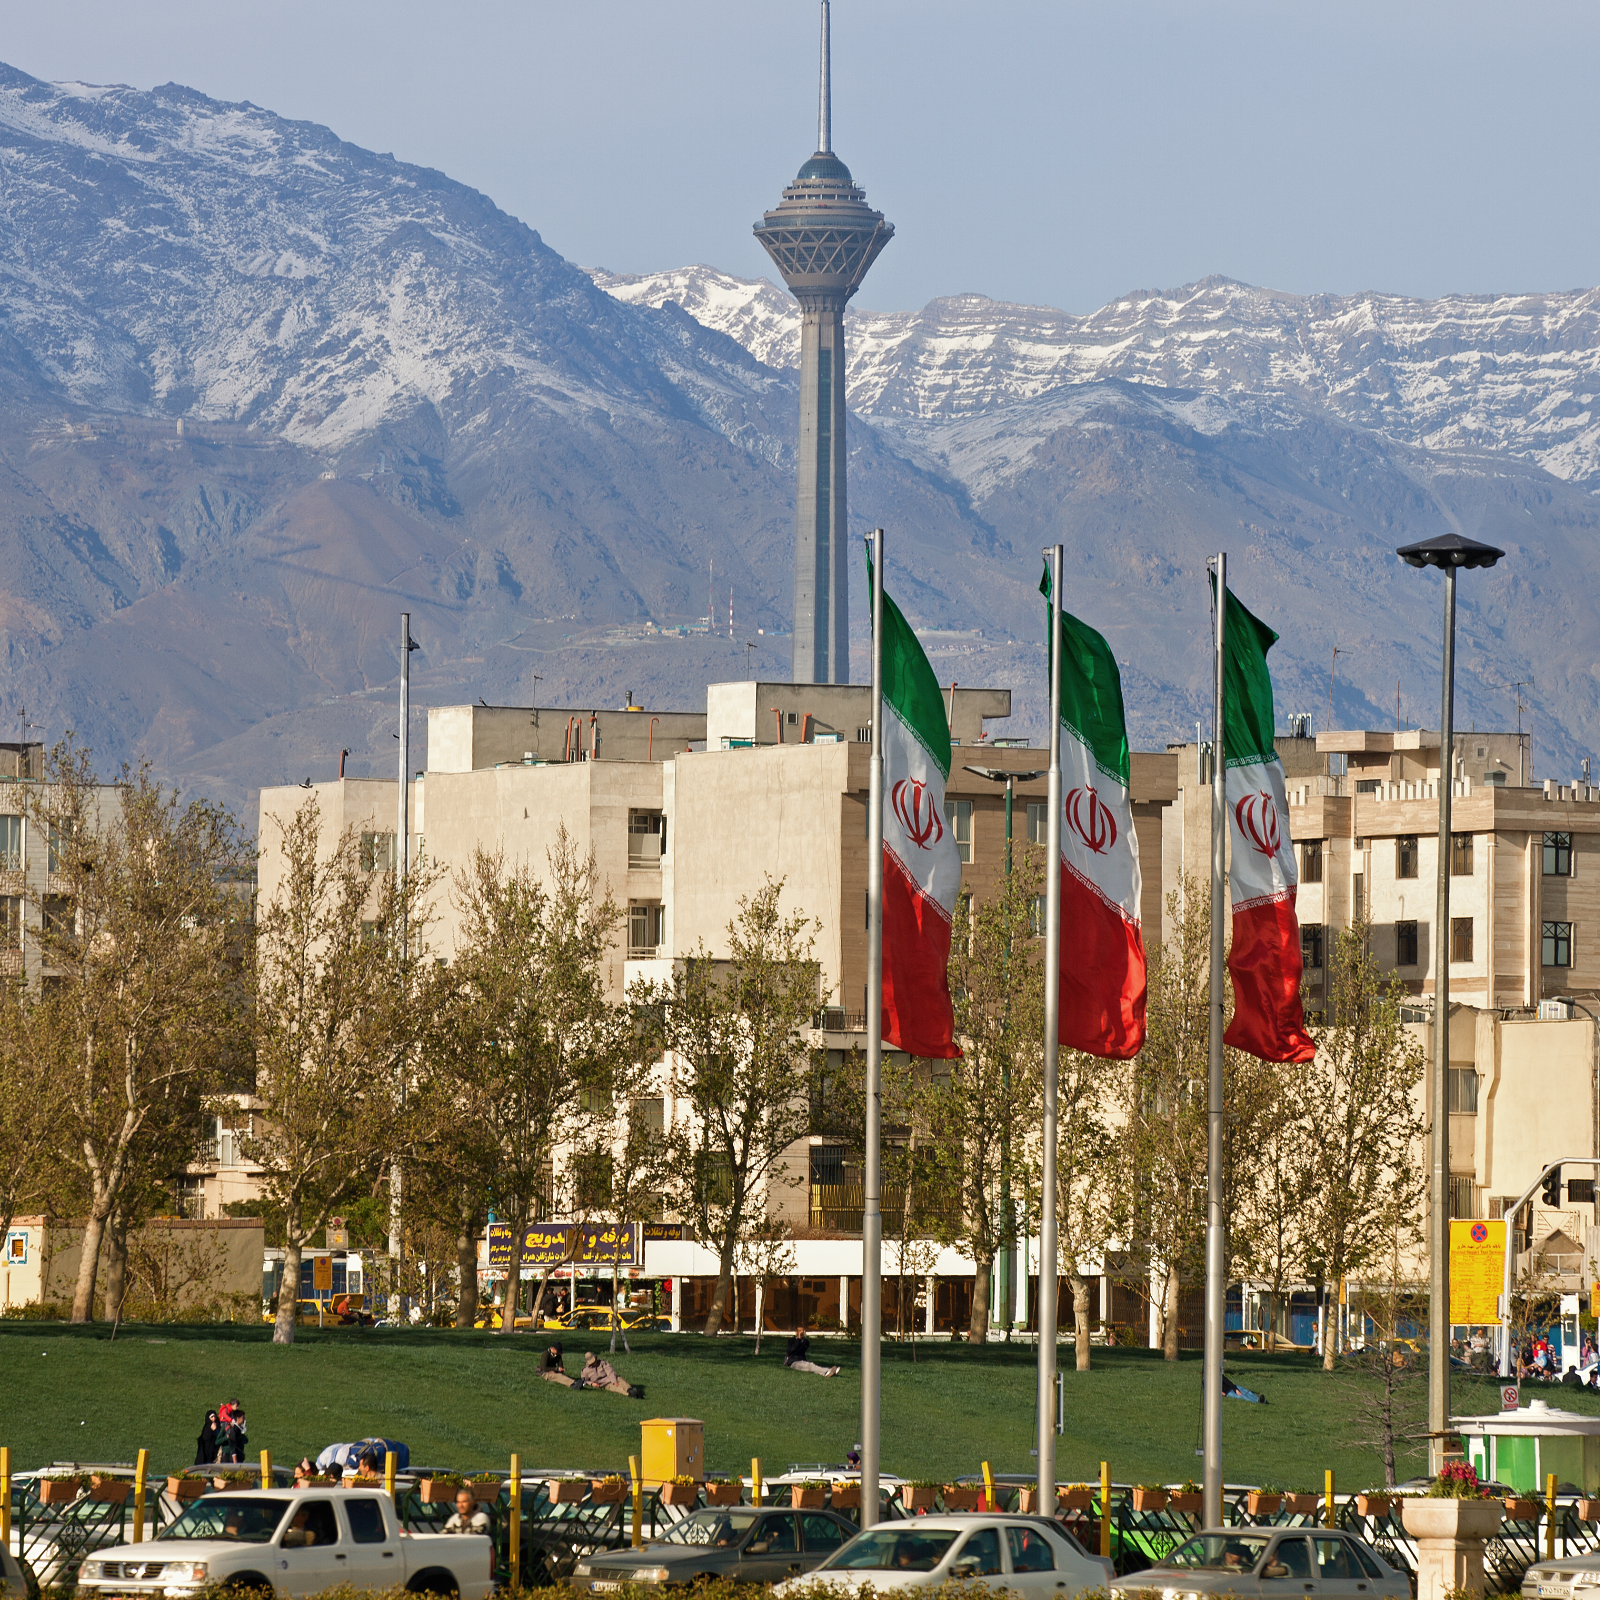 Details of Iran’s National Cryptocurrency Unveiled